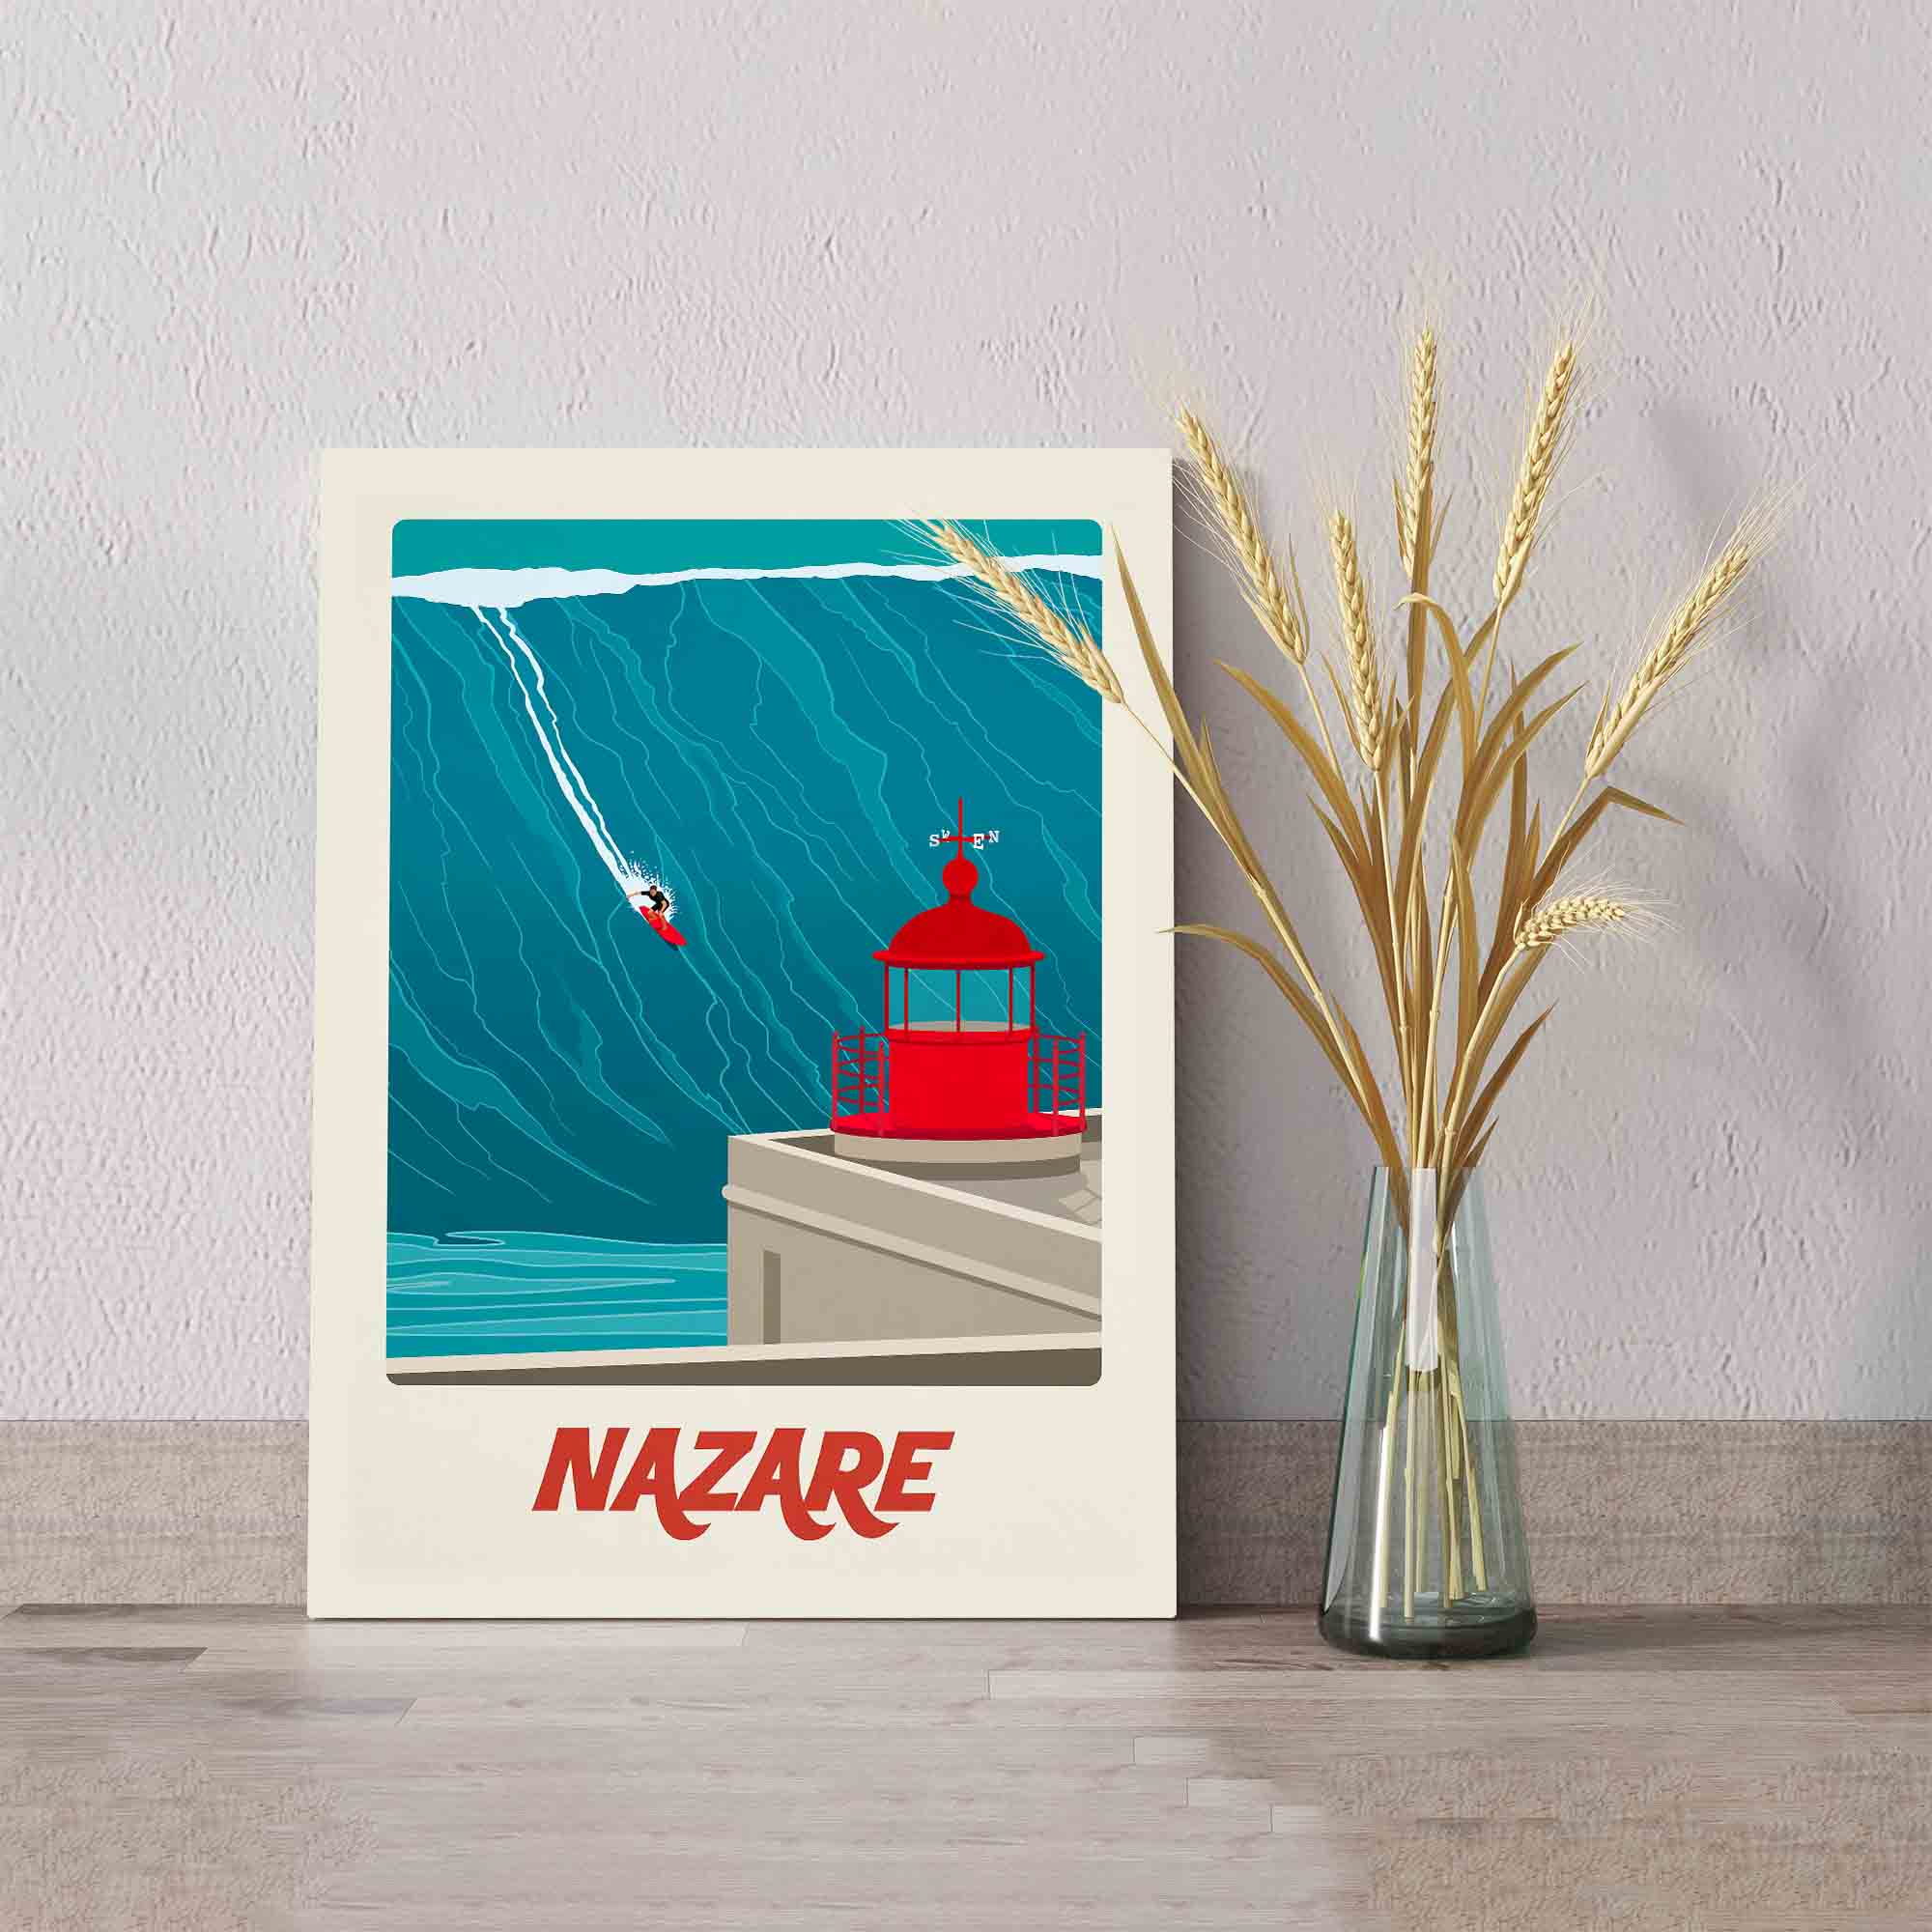 Nazare Surf Canvas, Travel Poster Canvas, Wall Art Canvas, Gift Canvas